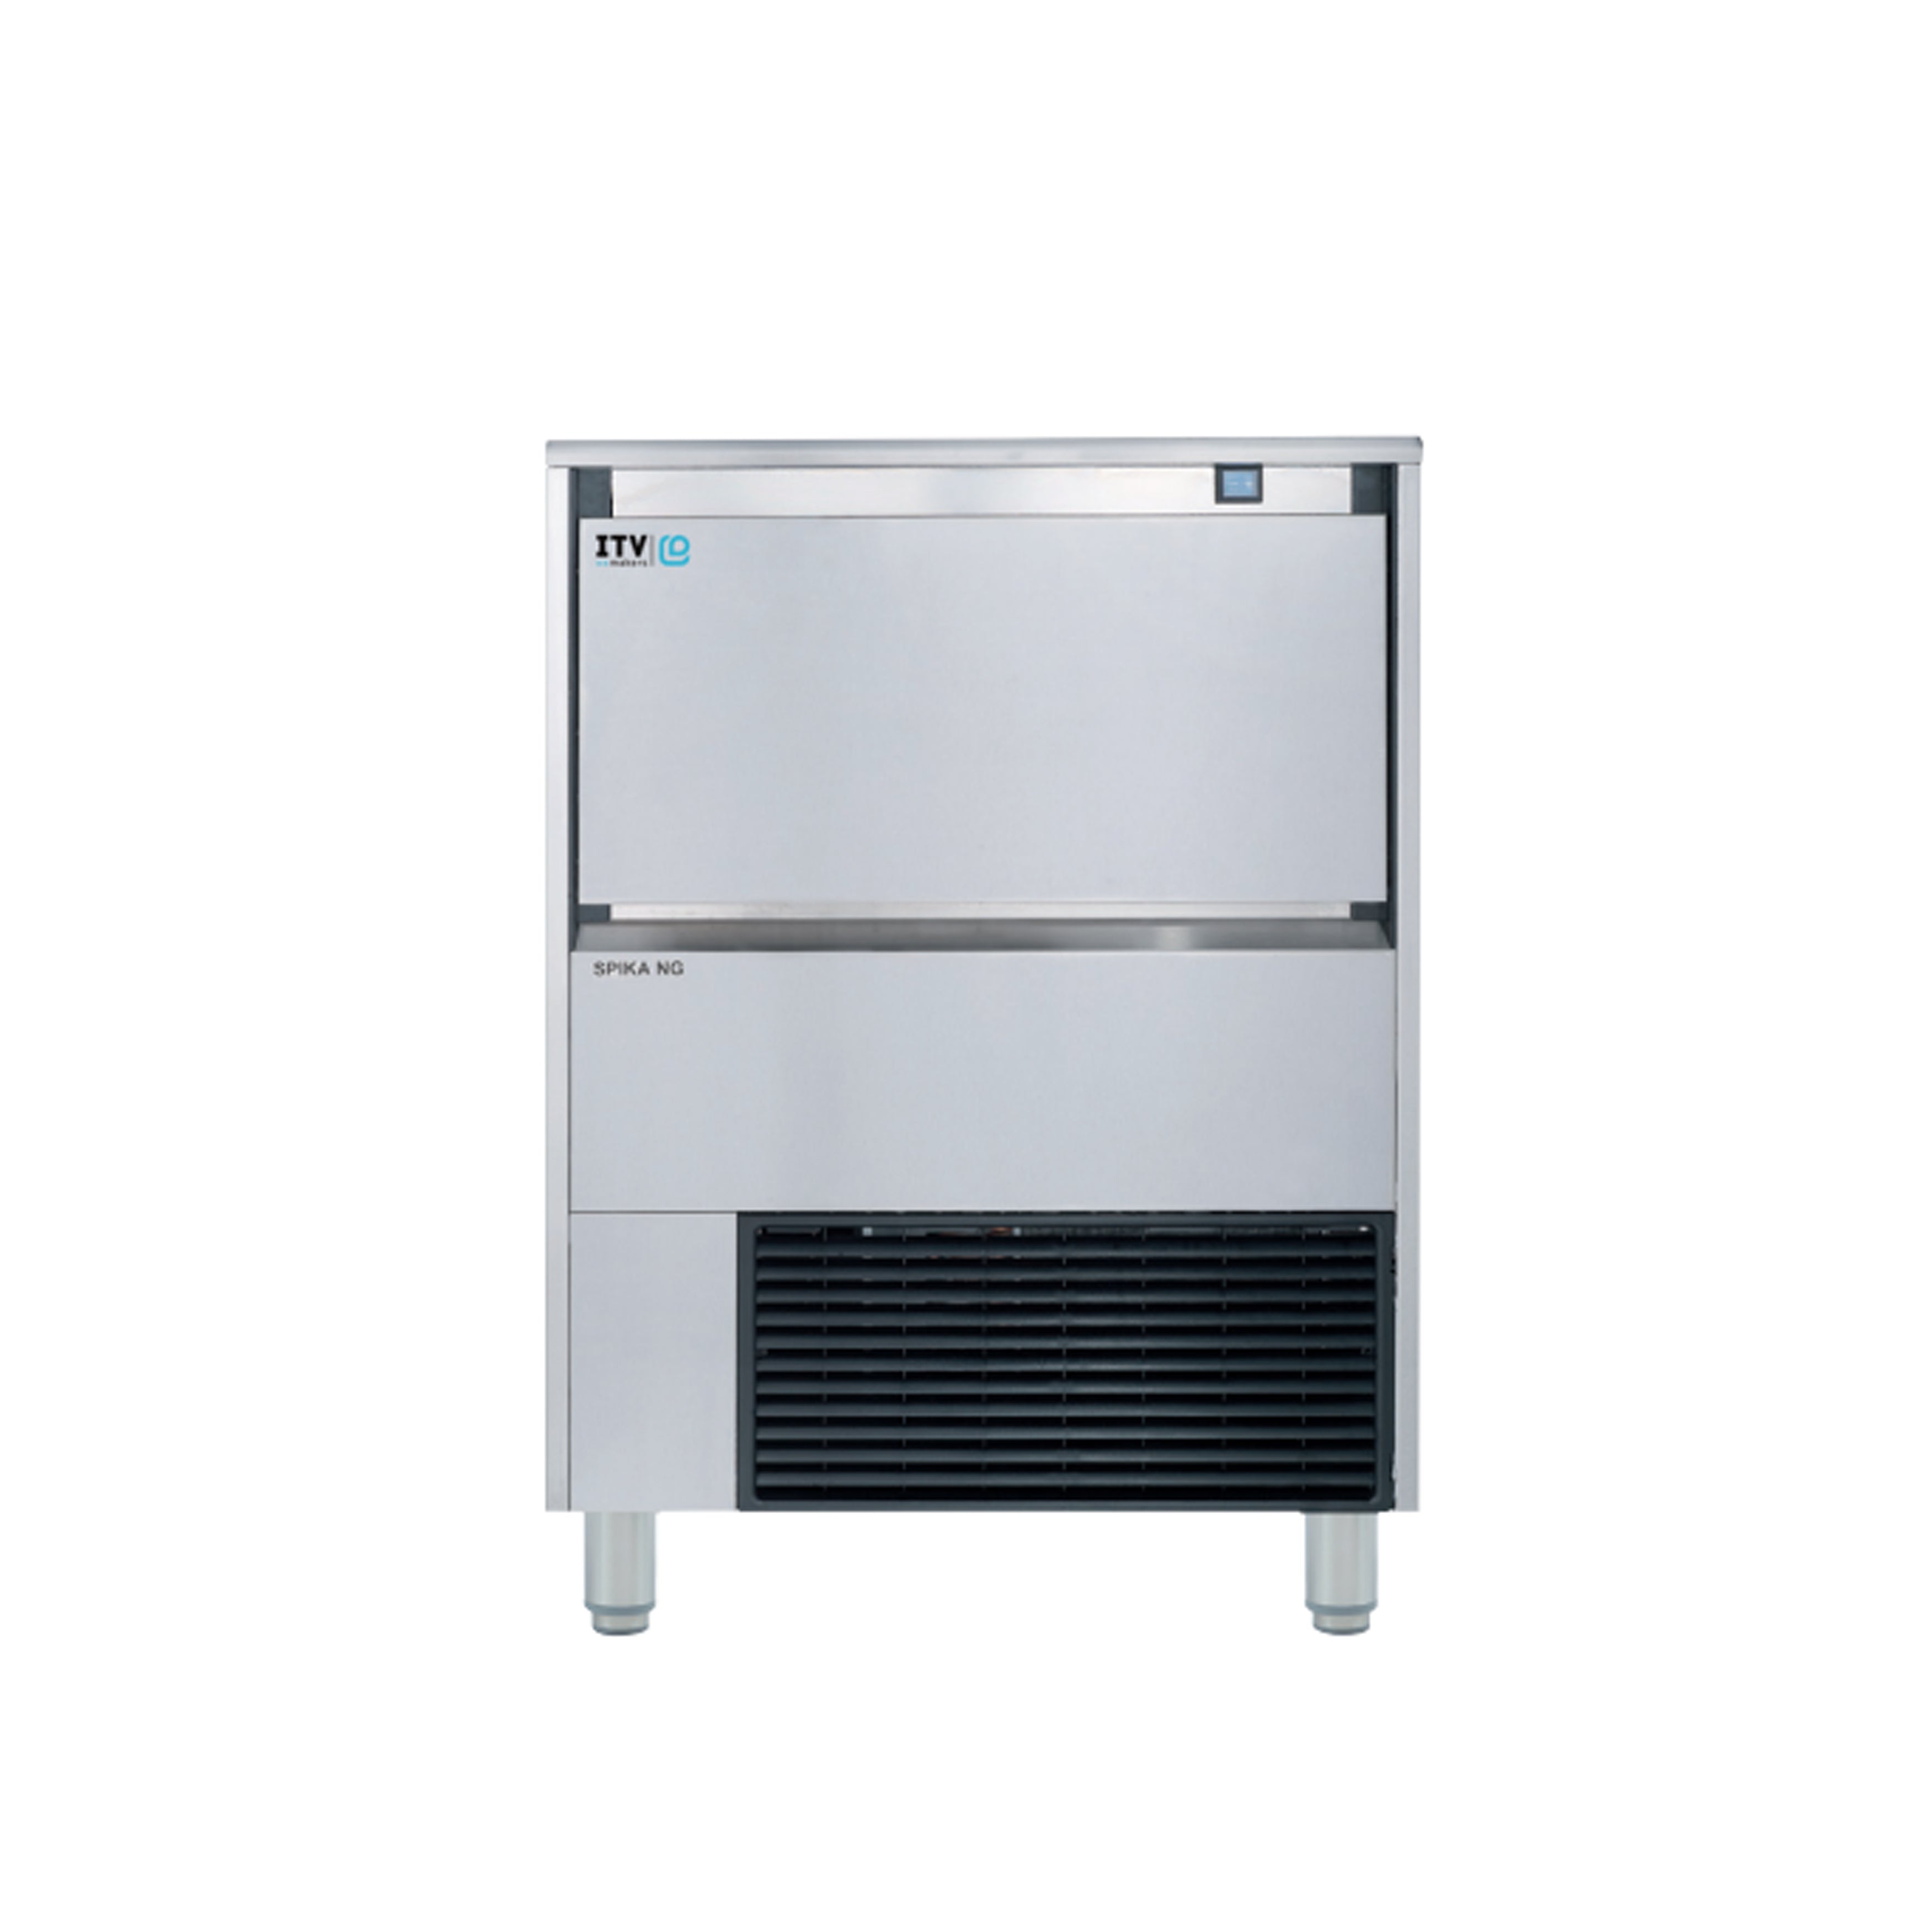 ITV - SPIKA NG 230A, Commercial Spika Cubers under-counter Ice Maker Self-Contained Ice Cube Machine 231lbs